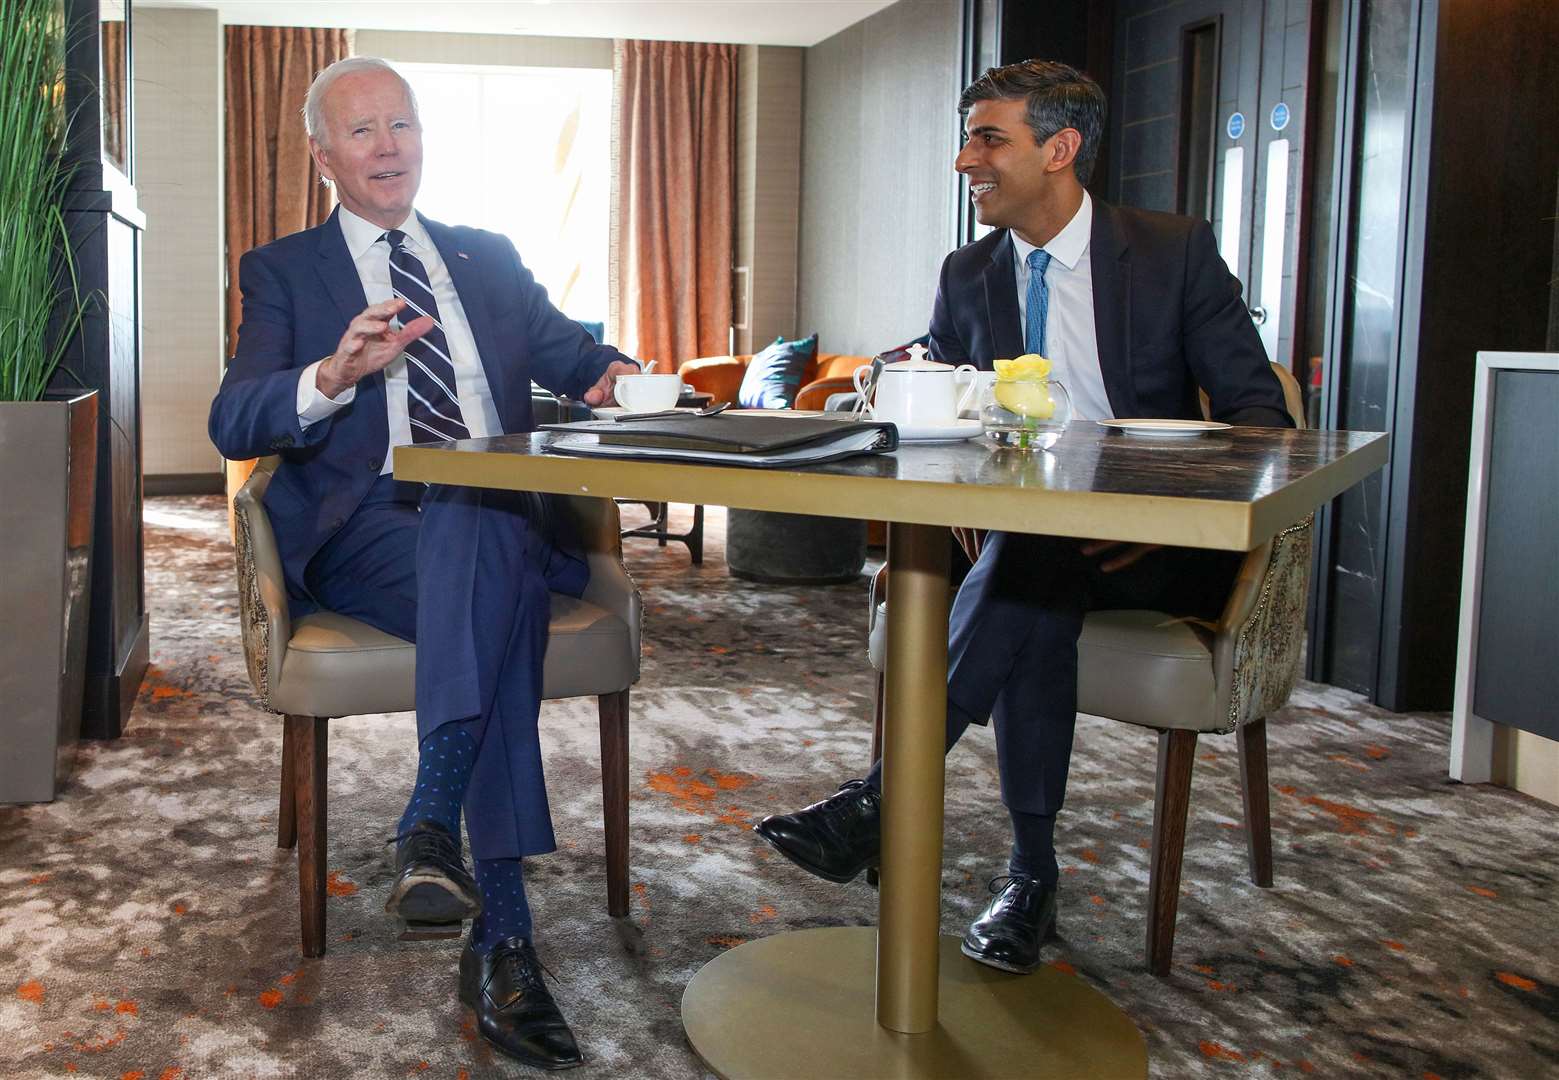 Joe Biden will host discussions with Rishi Sunak at the White House (Paul Faith/PA)